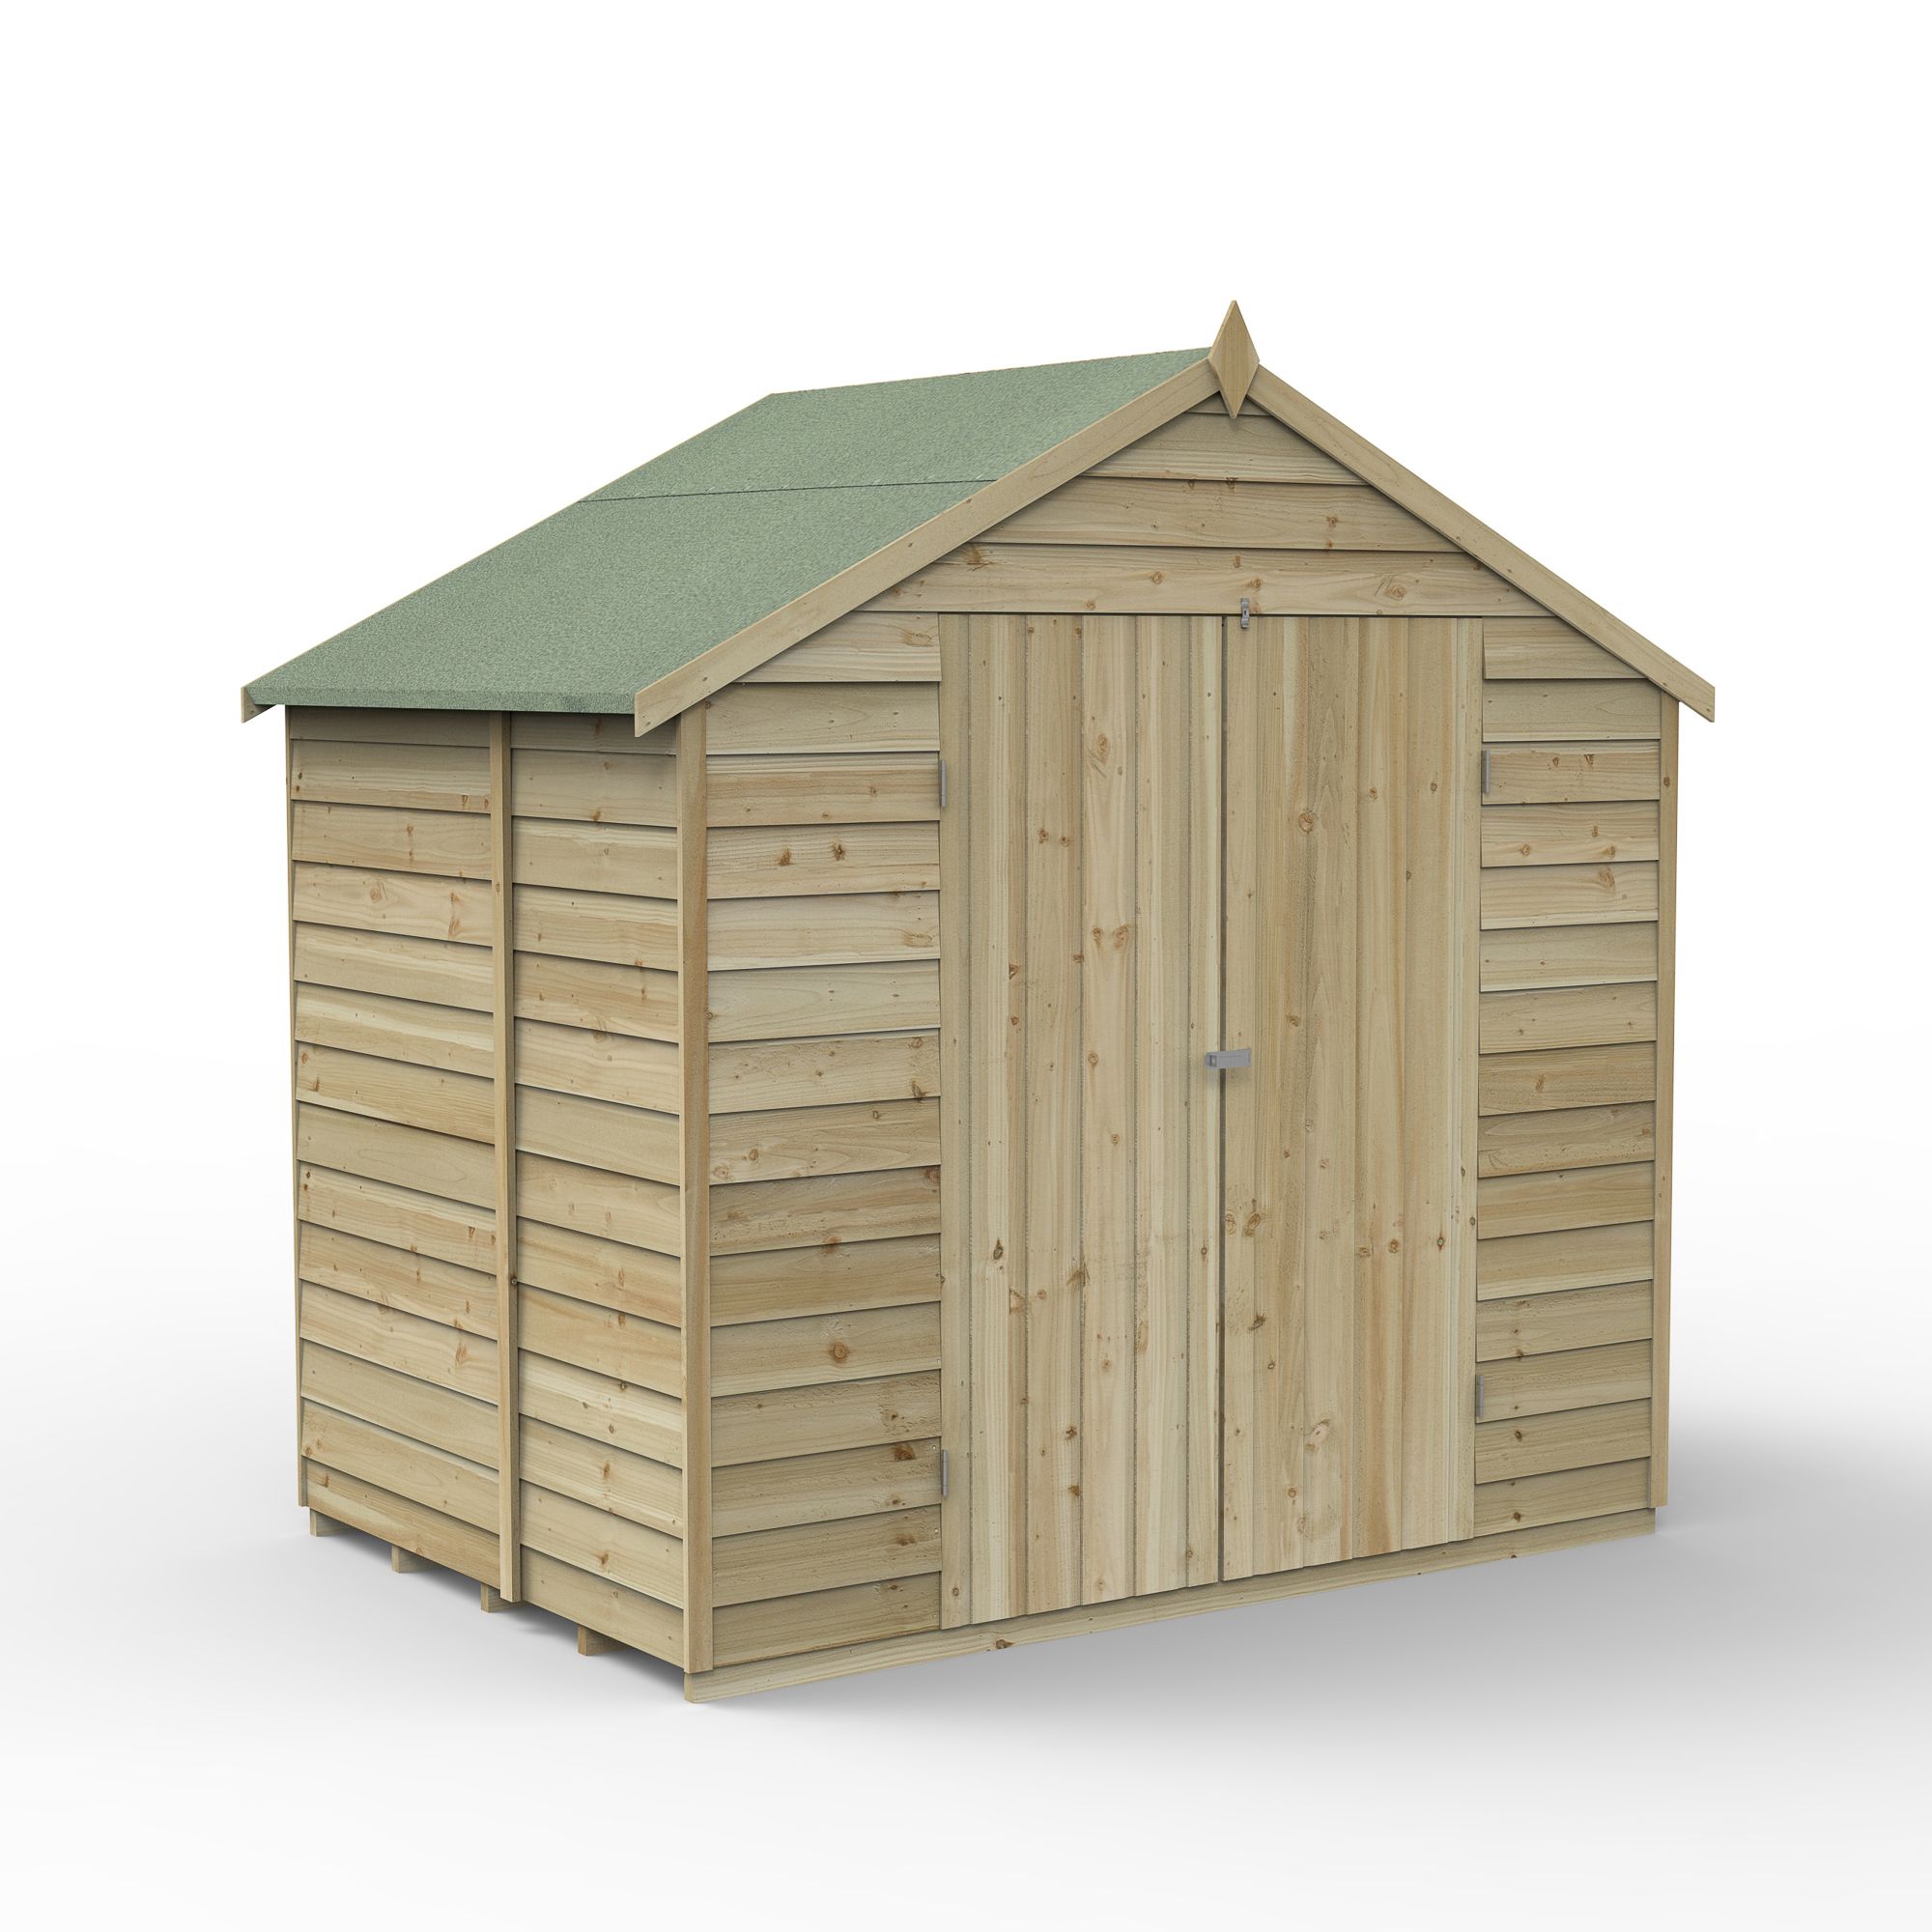 Forest Garden Overlap 7x5 ft Apex Wooden 2 door Shed with floor - Assembly service included